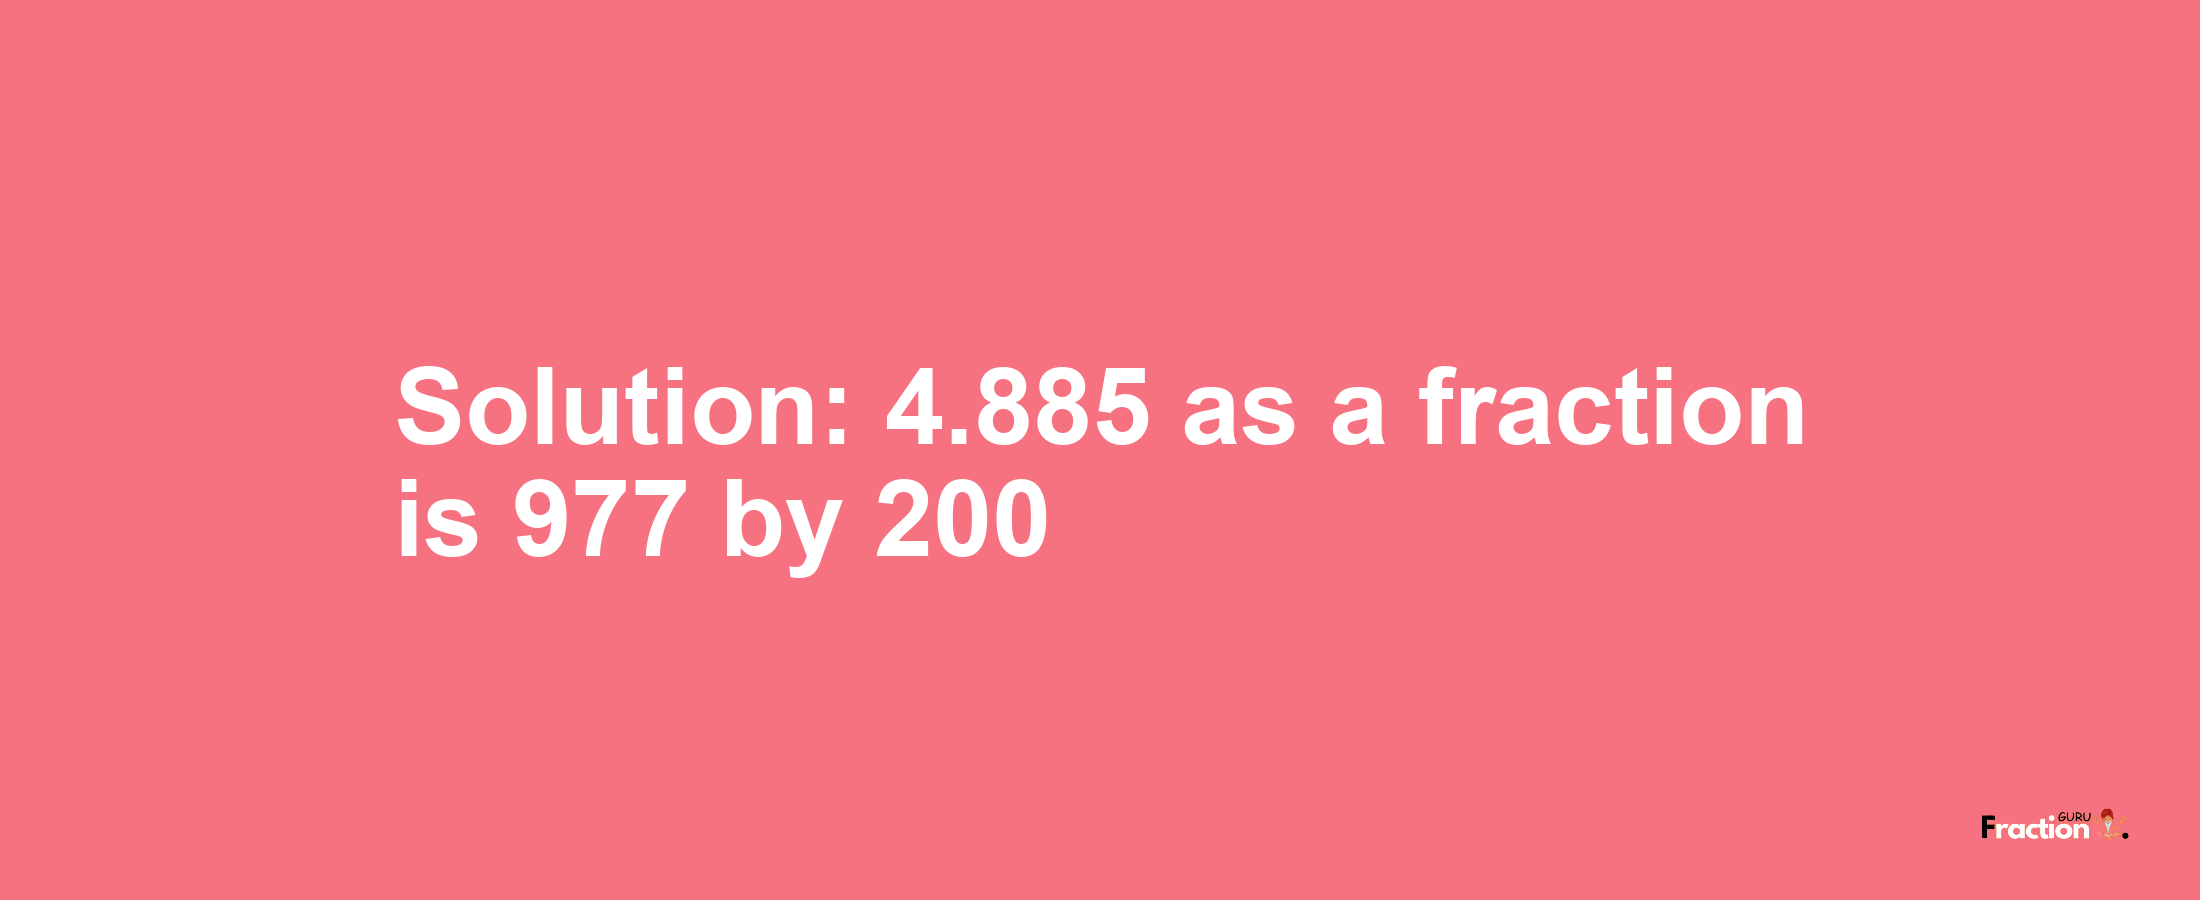 Solution:4.885 as a fraction is 977/200